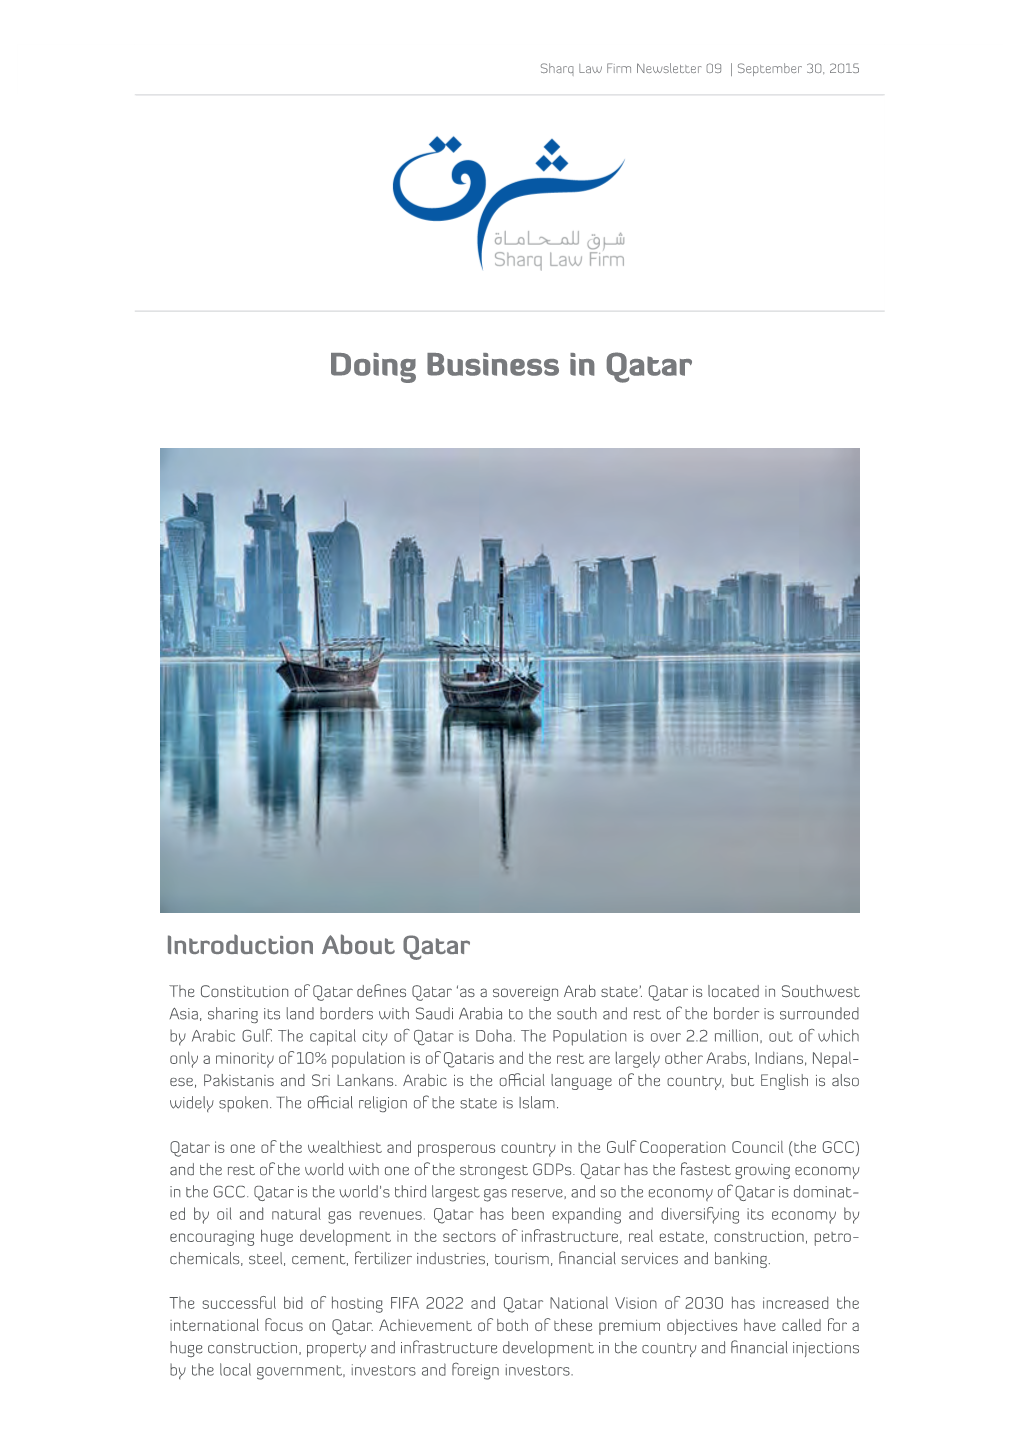 Doing Business in Qatar